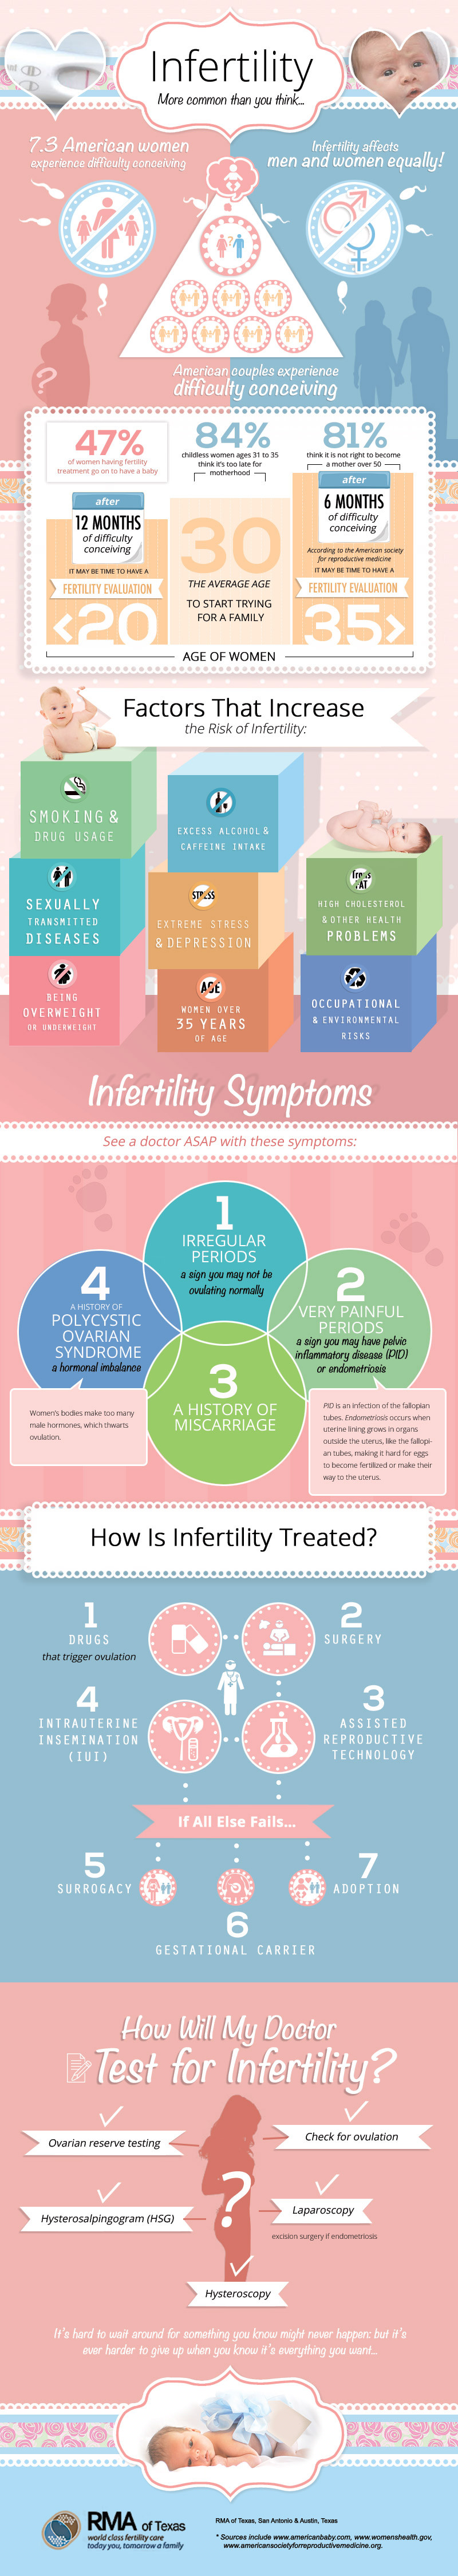 Infertility Information and Statistics